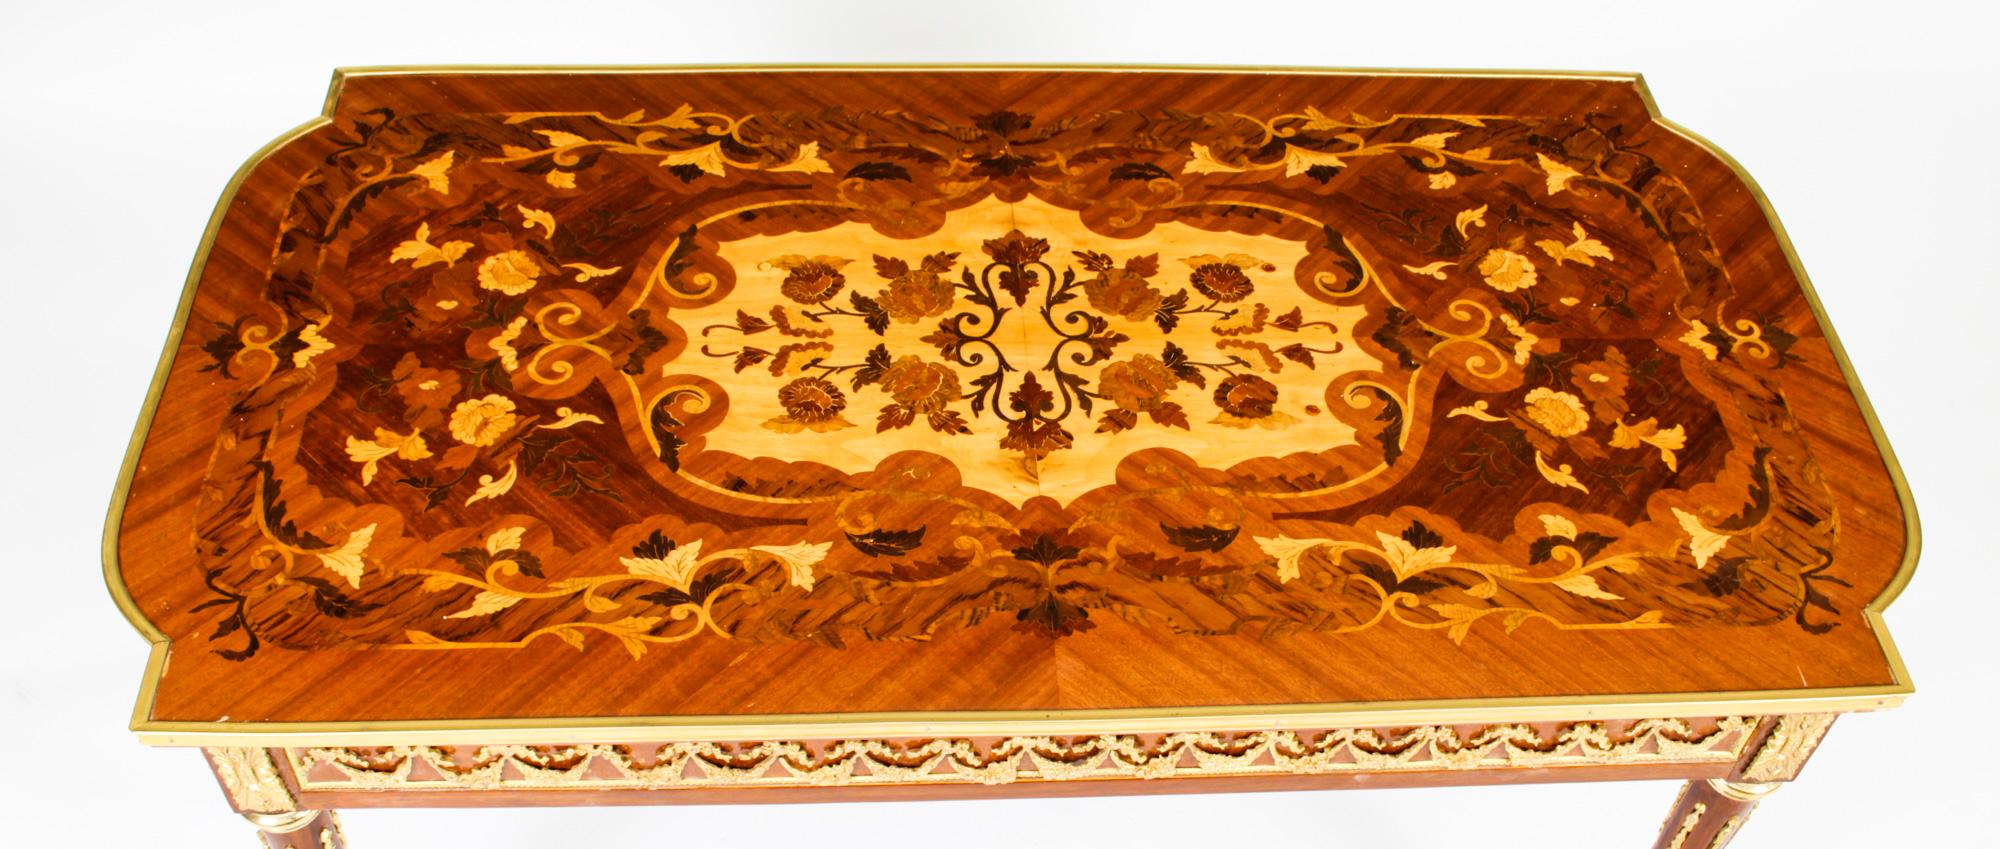 This is a stunningly beautiful Vintage French marquetry burr walnut coffee table, masterfully inlaid with multi-coloured exotic decorative floral inlays by a master craftsman and late 20th C in date.

The table’s breathtaking inlays set against